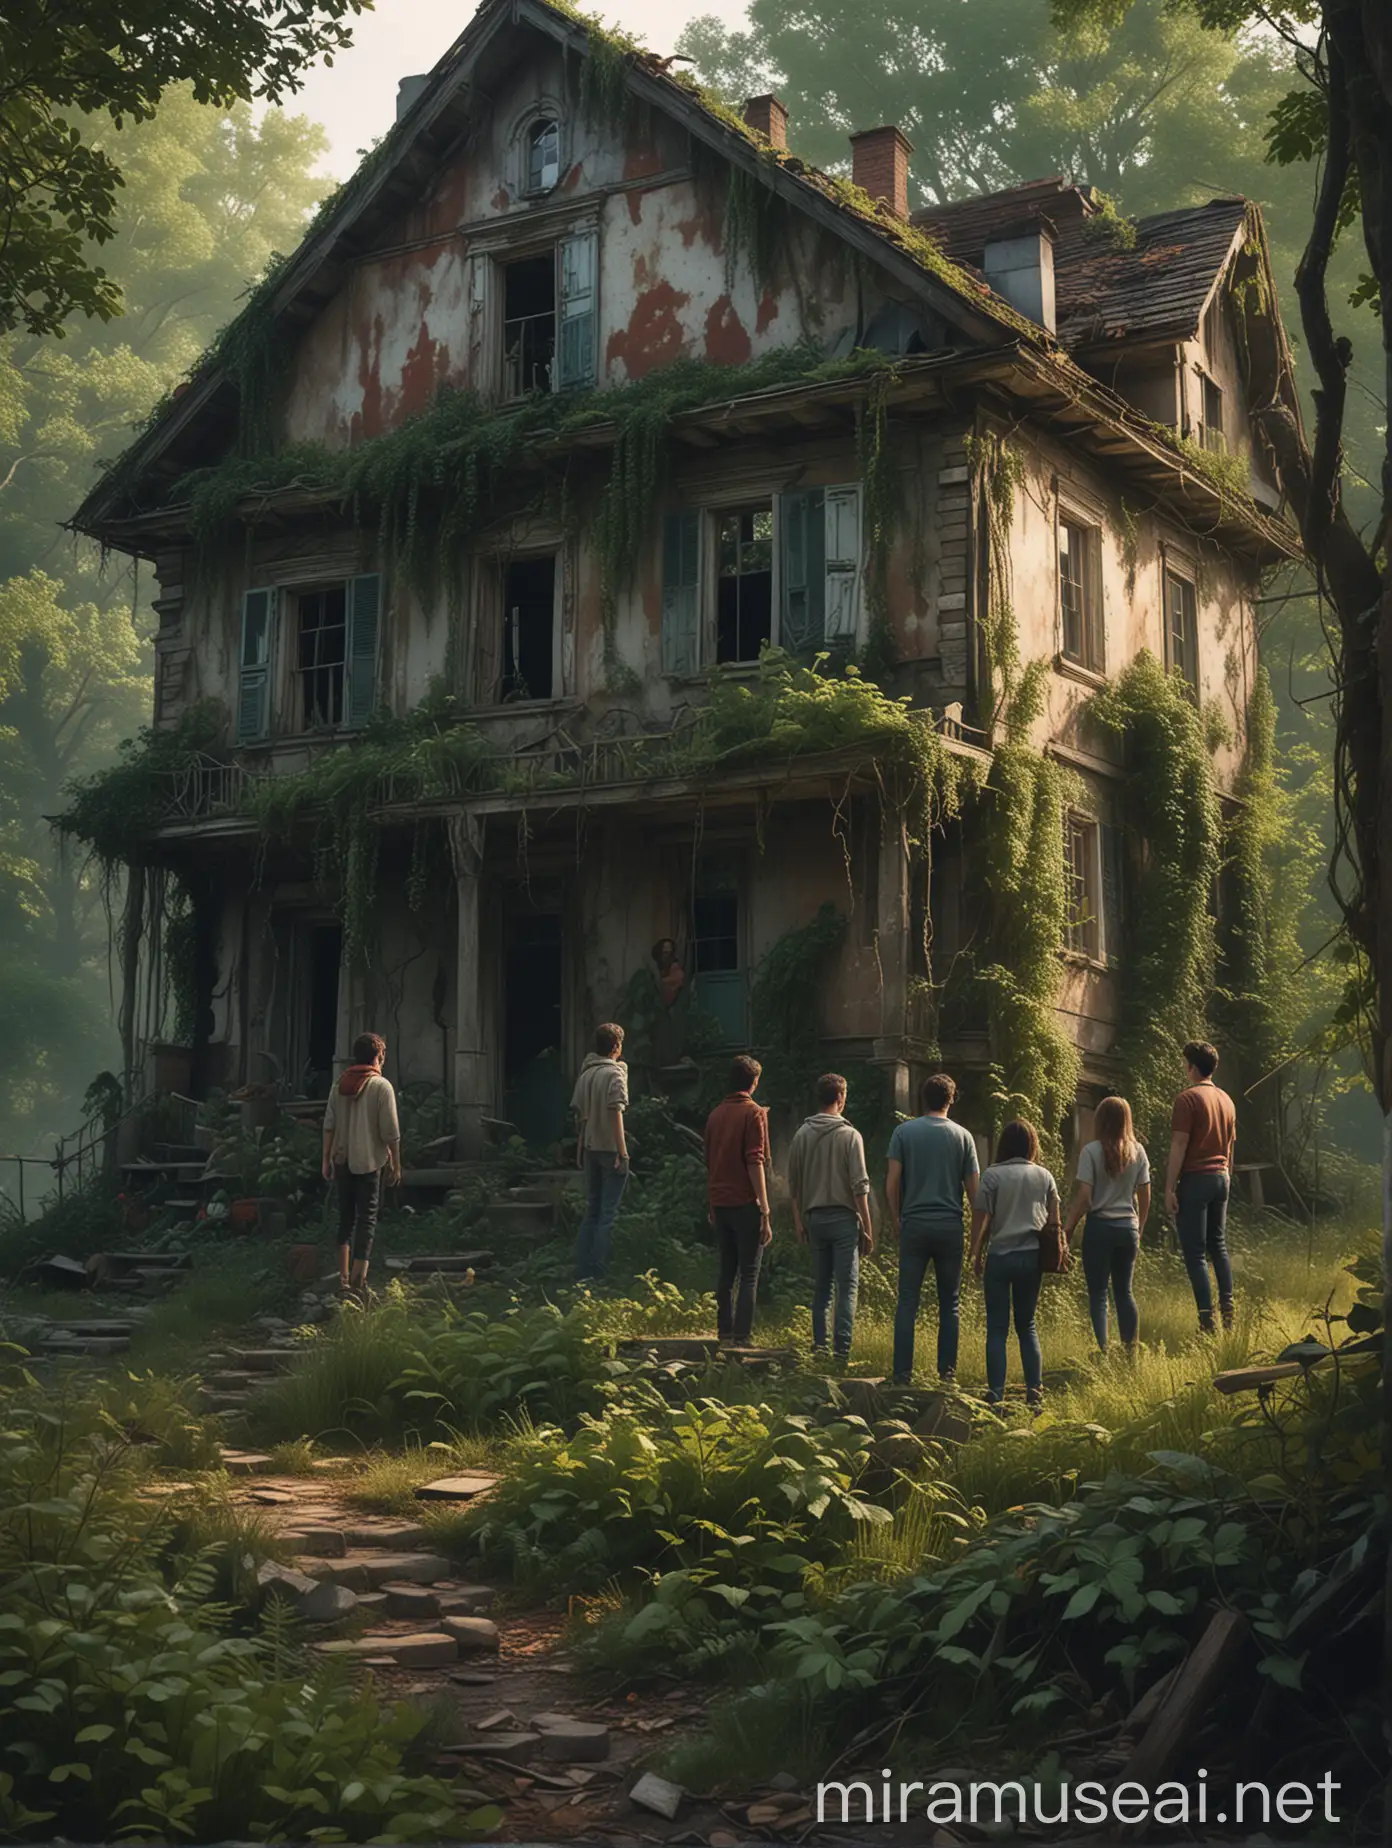 Curious Friends Exploring Abandoned Forest House at Dusk